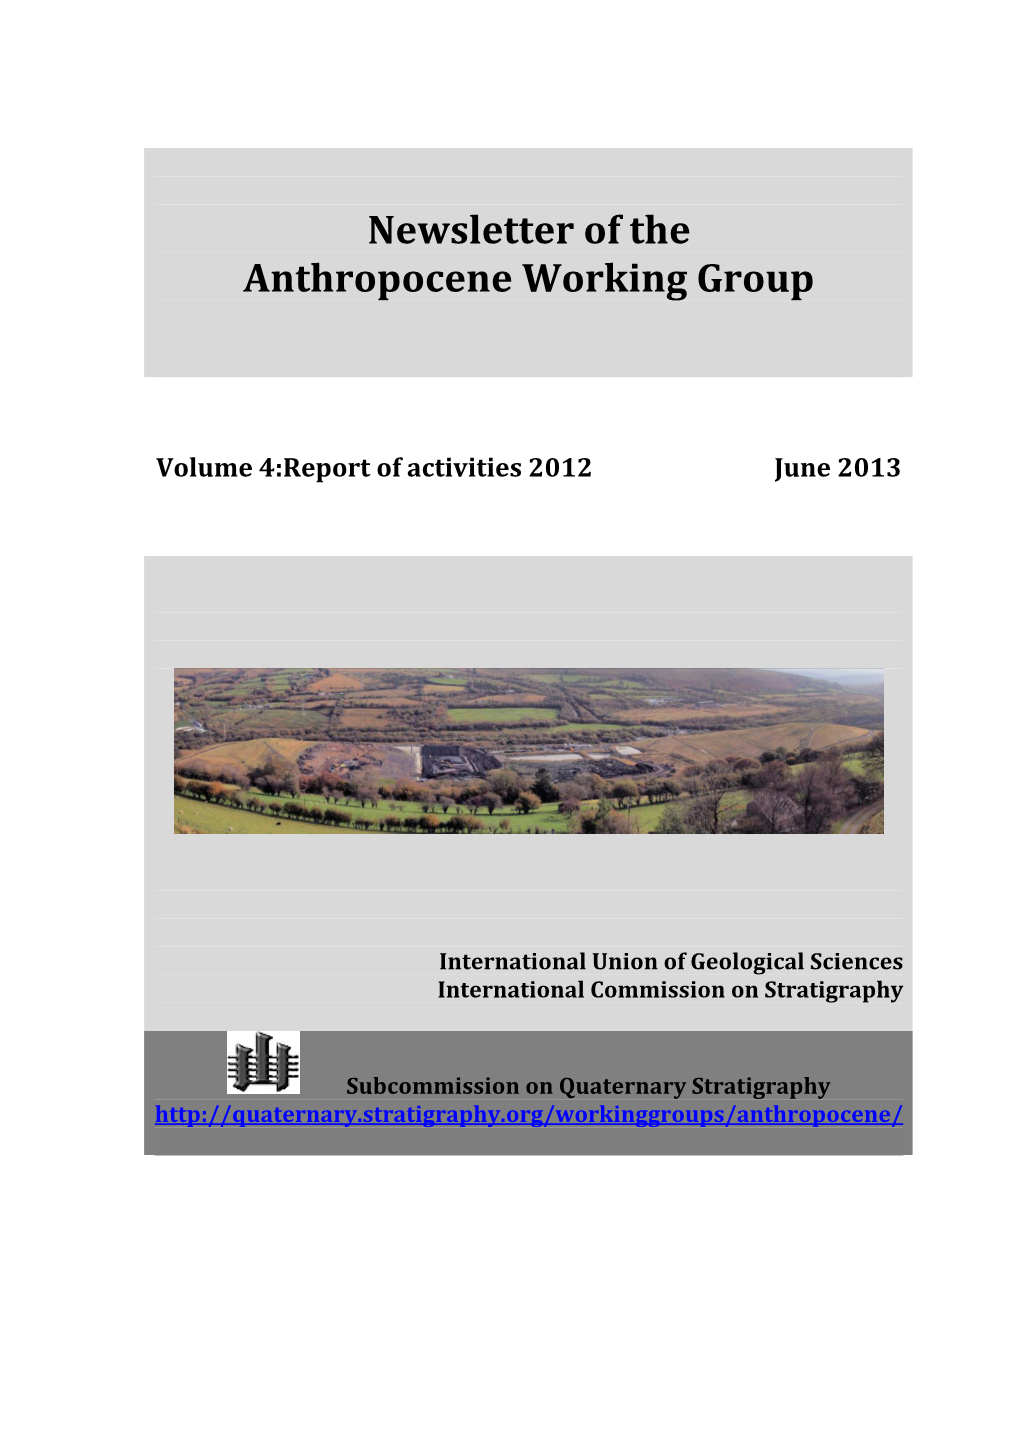 Newsletter of the Anthropocene Working Group